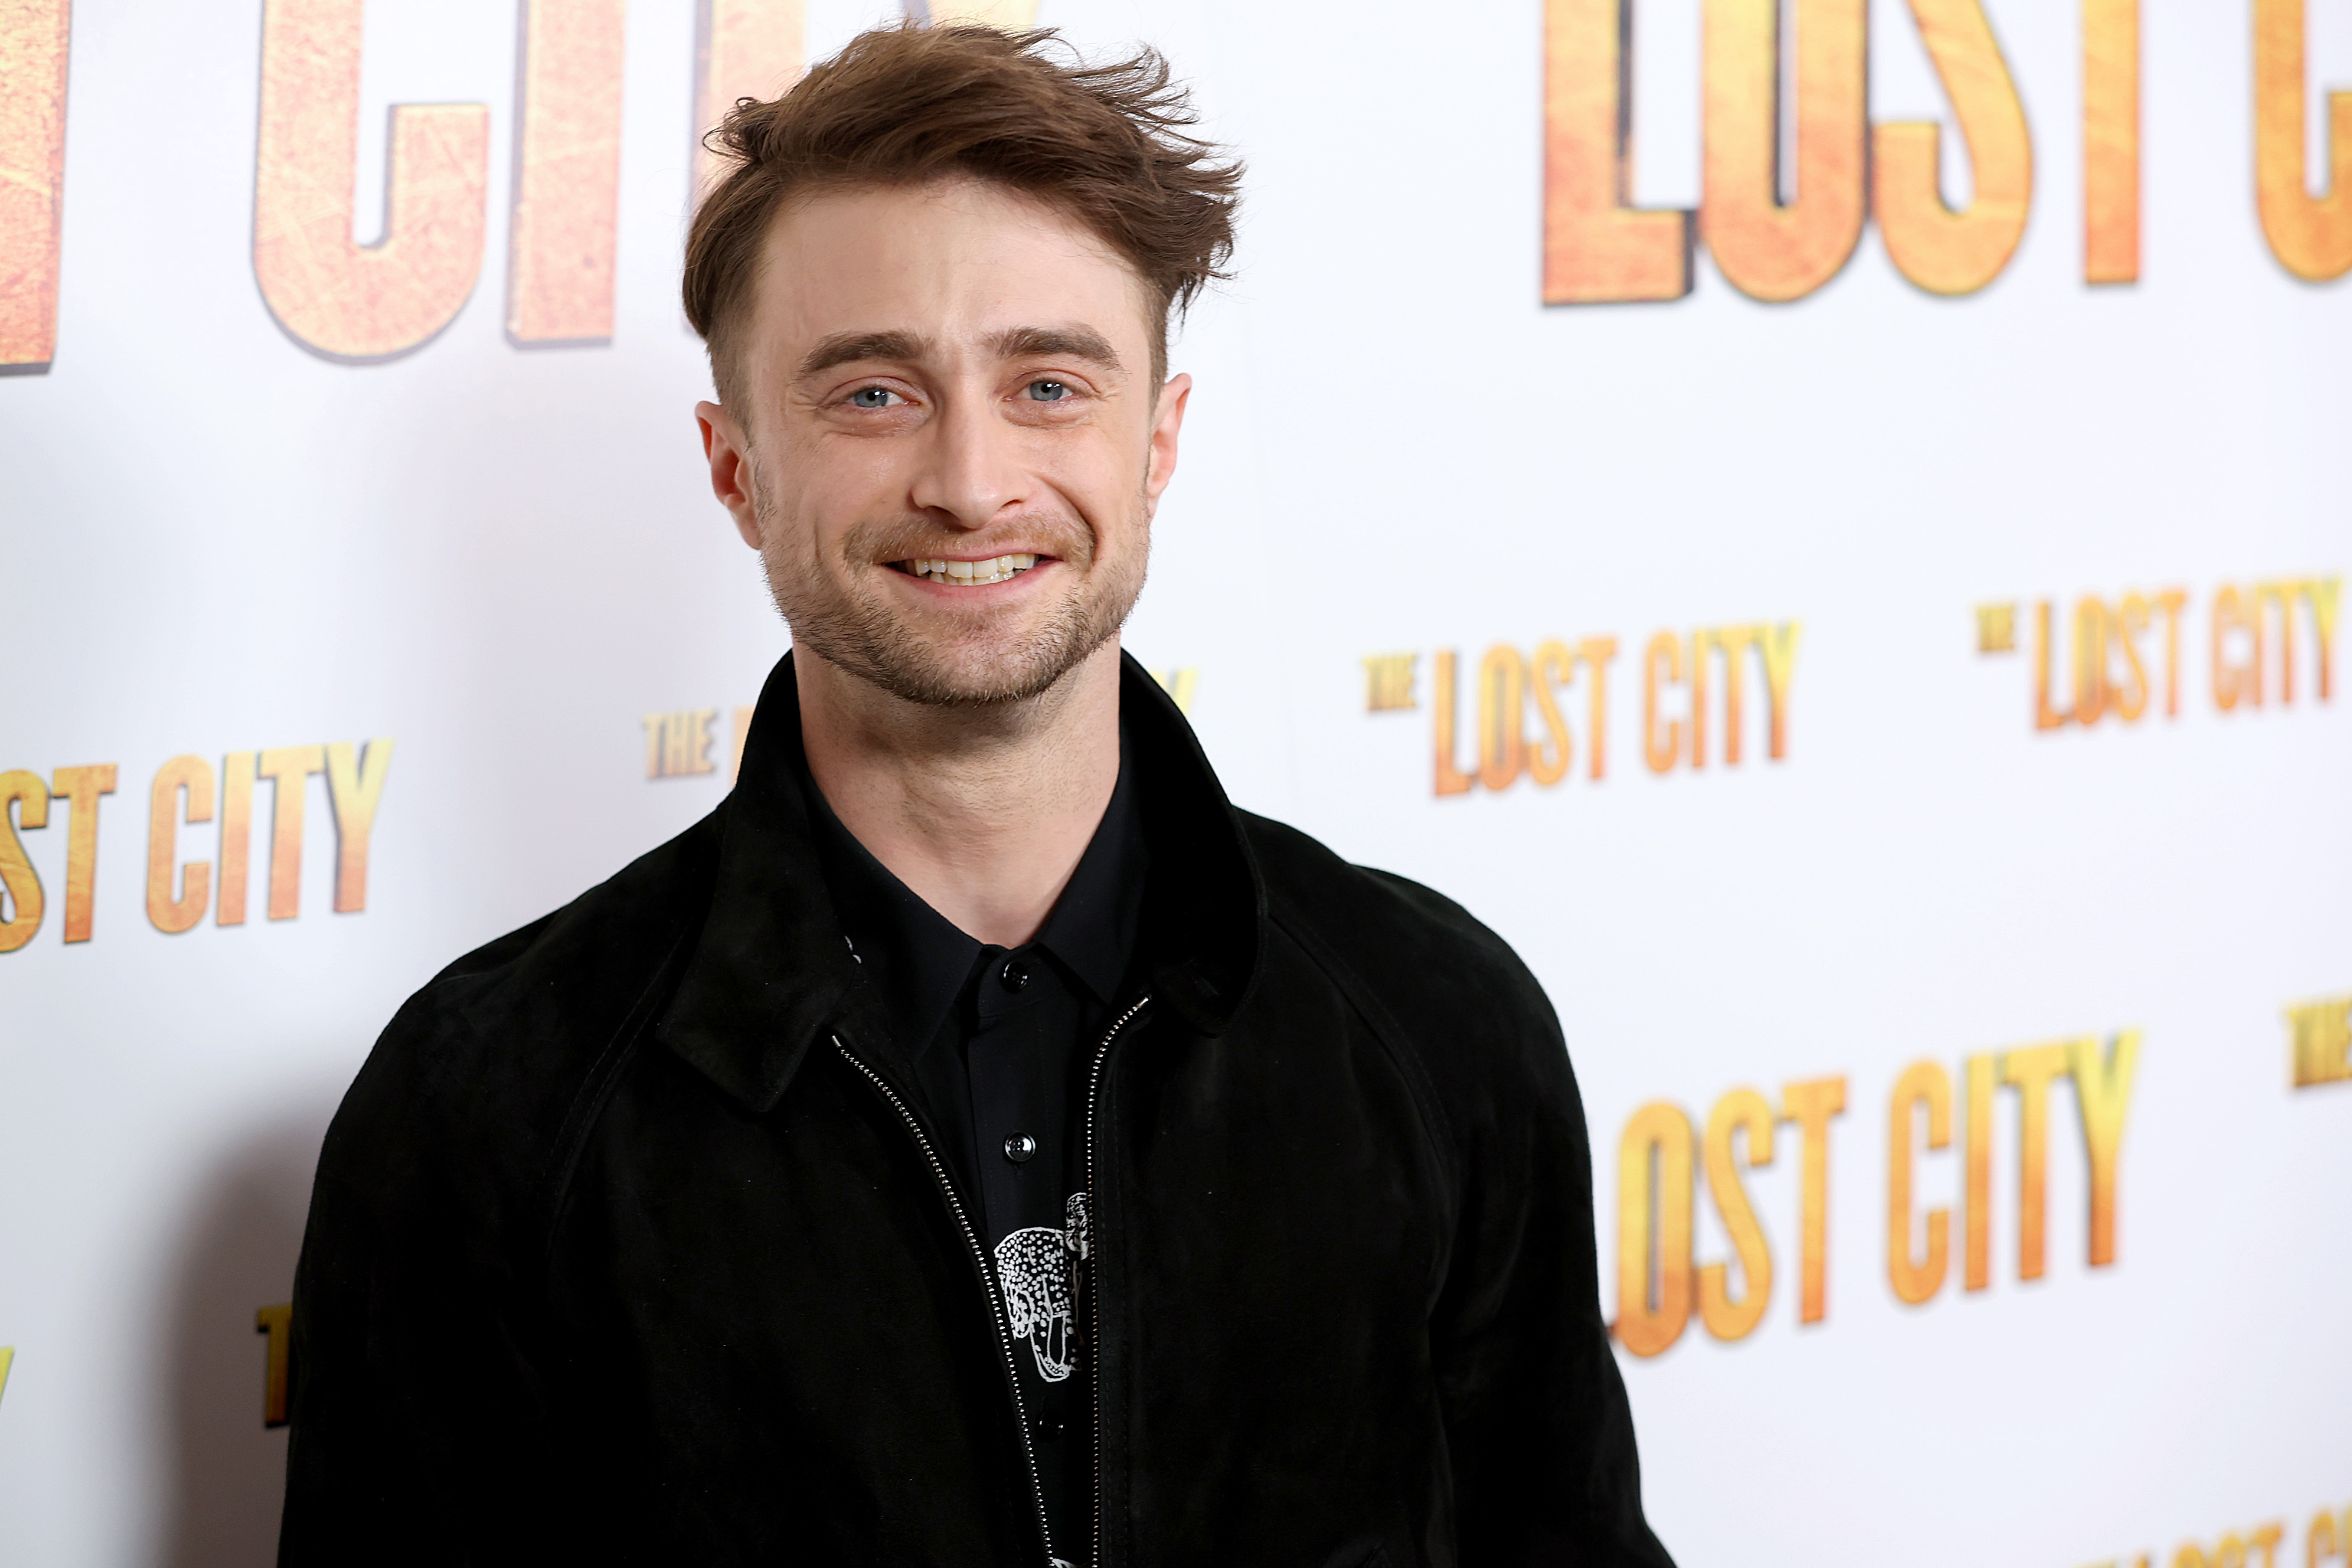 Daniel Radcliffe from Harry Potter attends the New York Tastemaker screening for The Lost City.